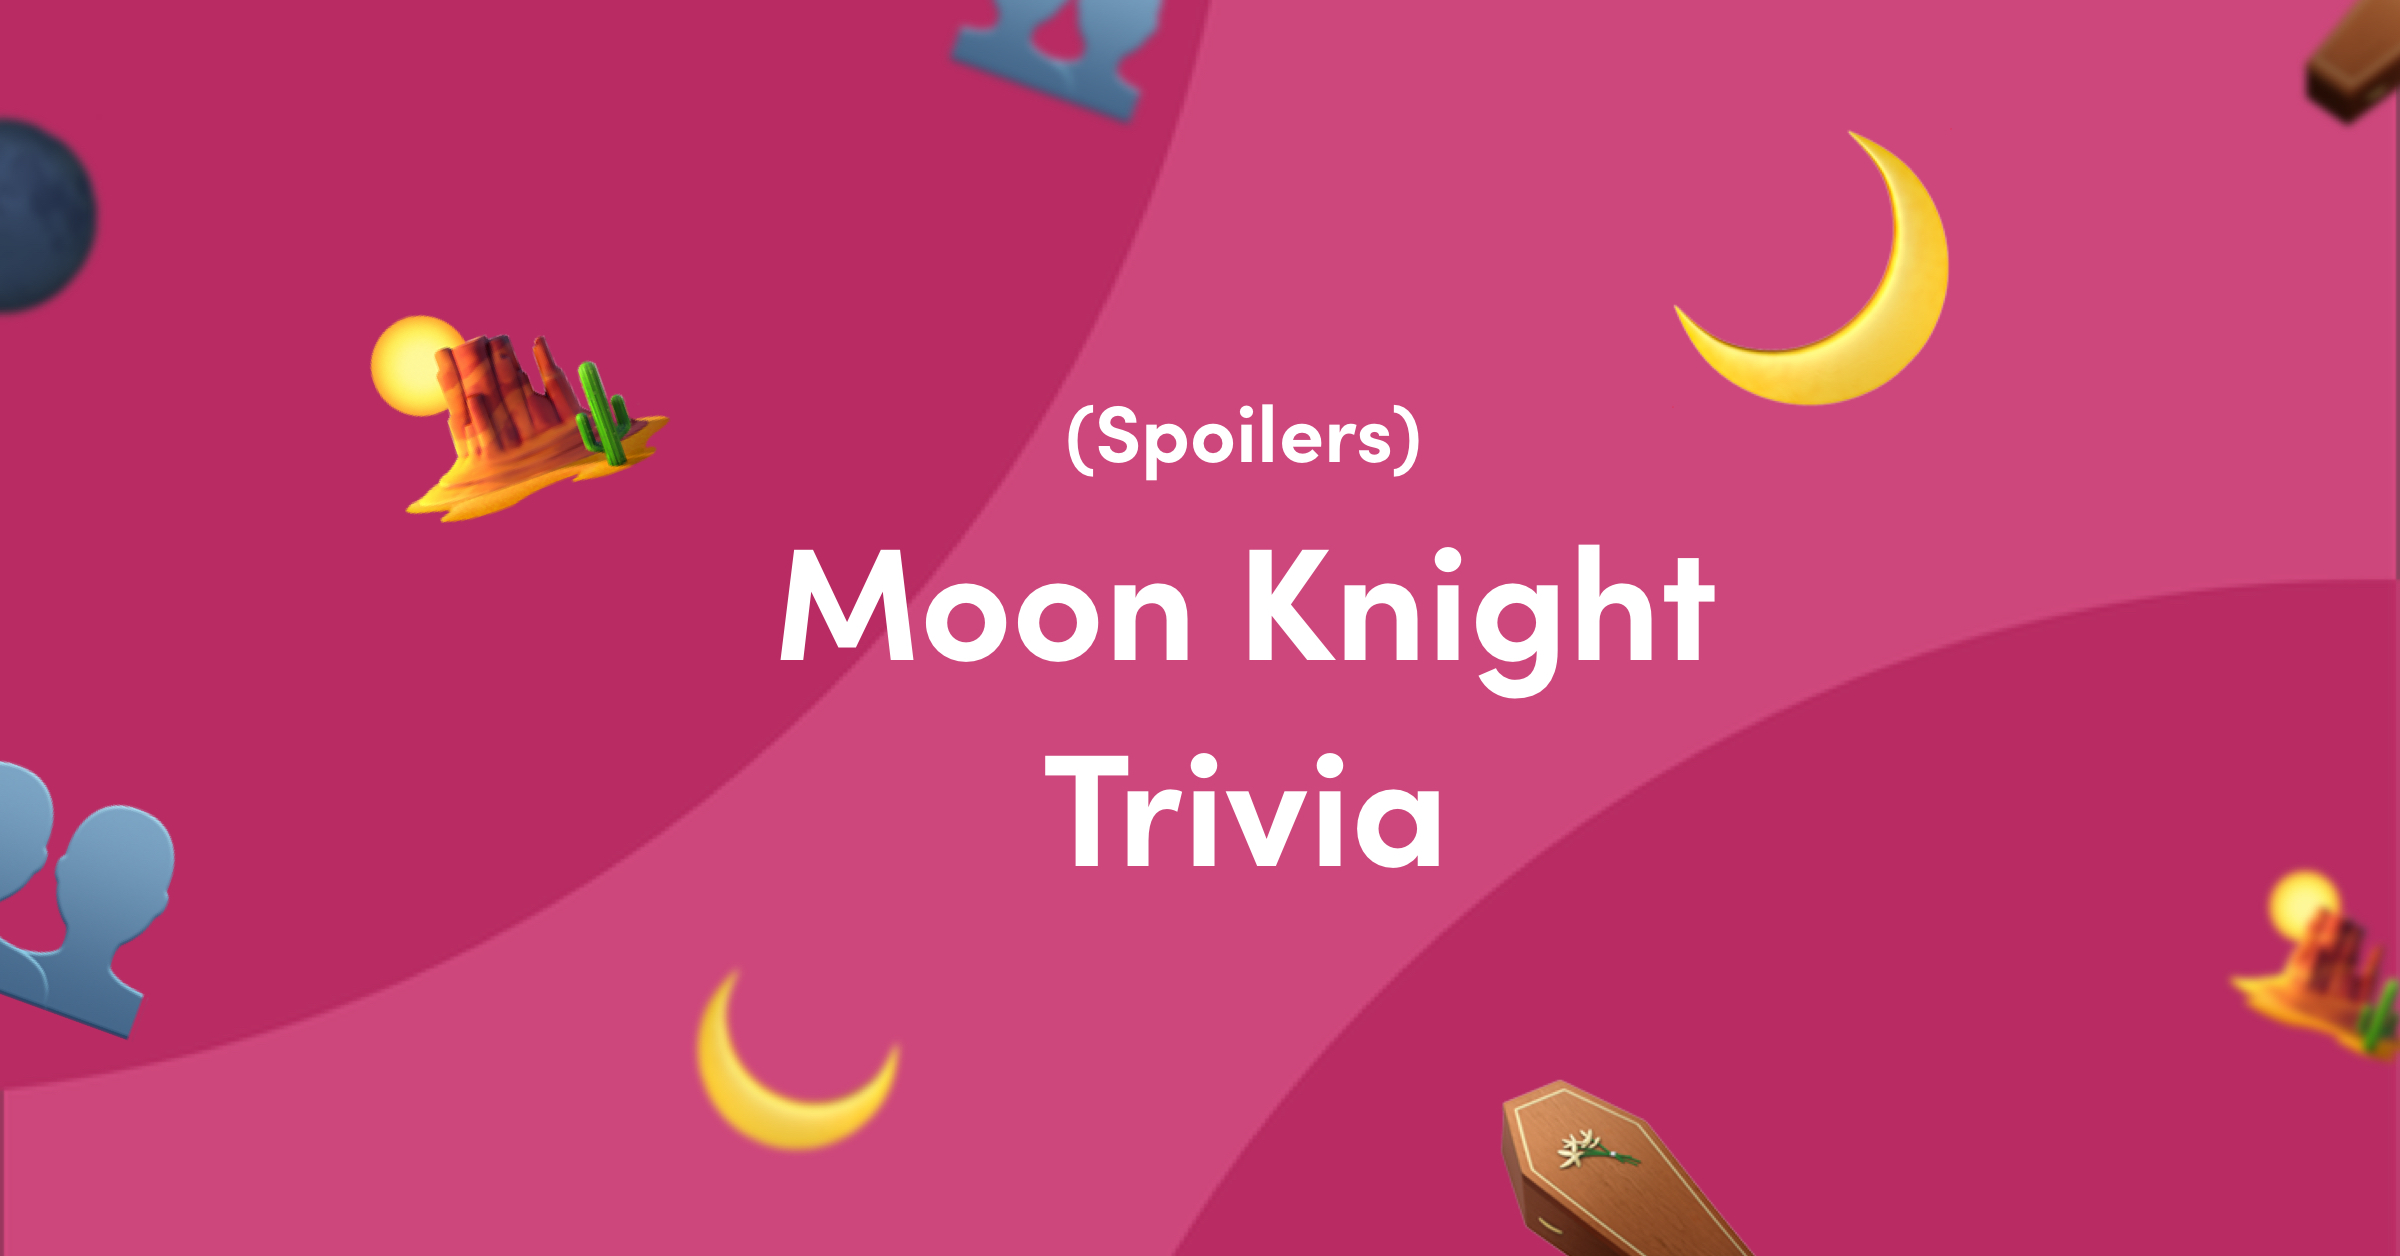 Emojis on pink background for Moon Knight trivia questions